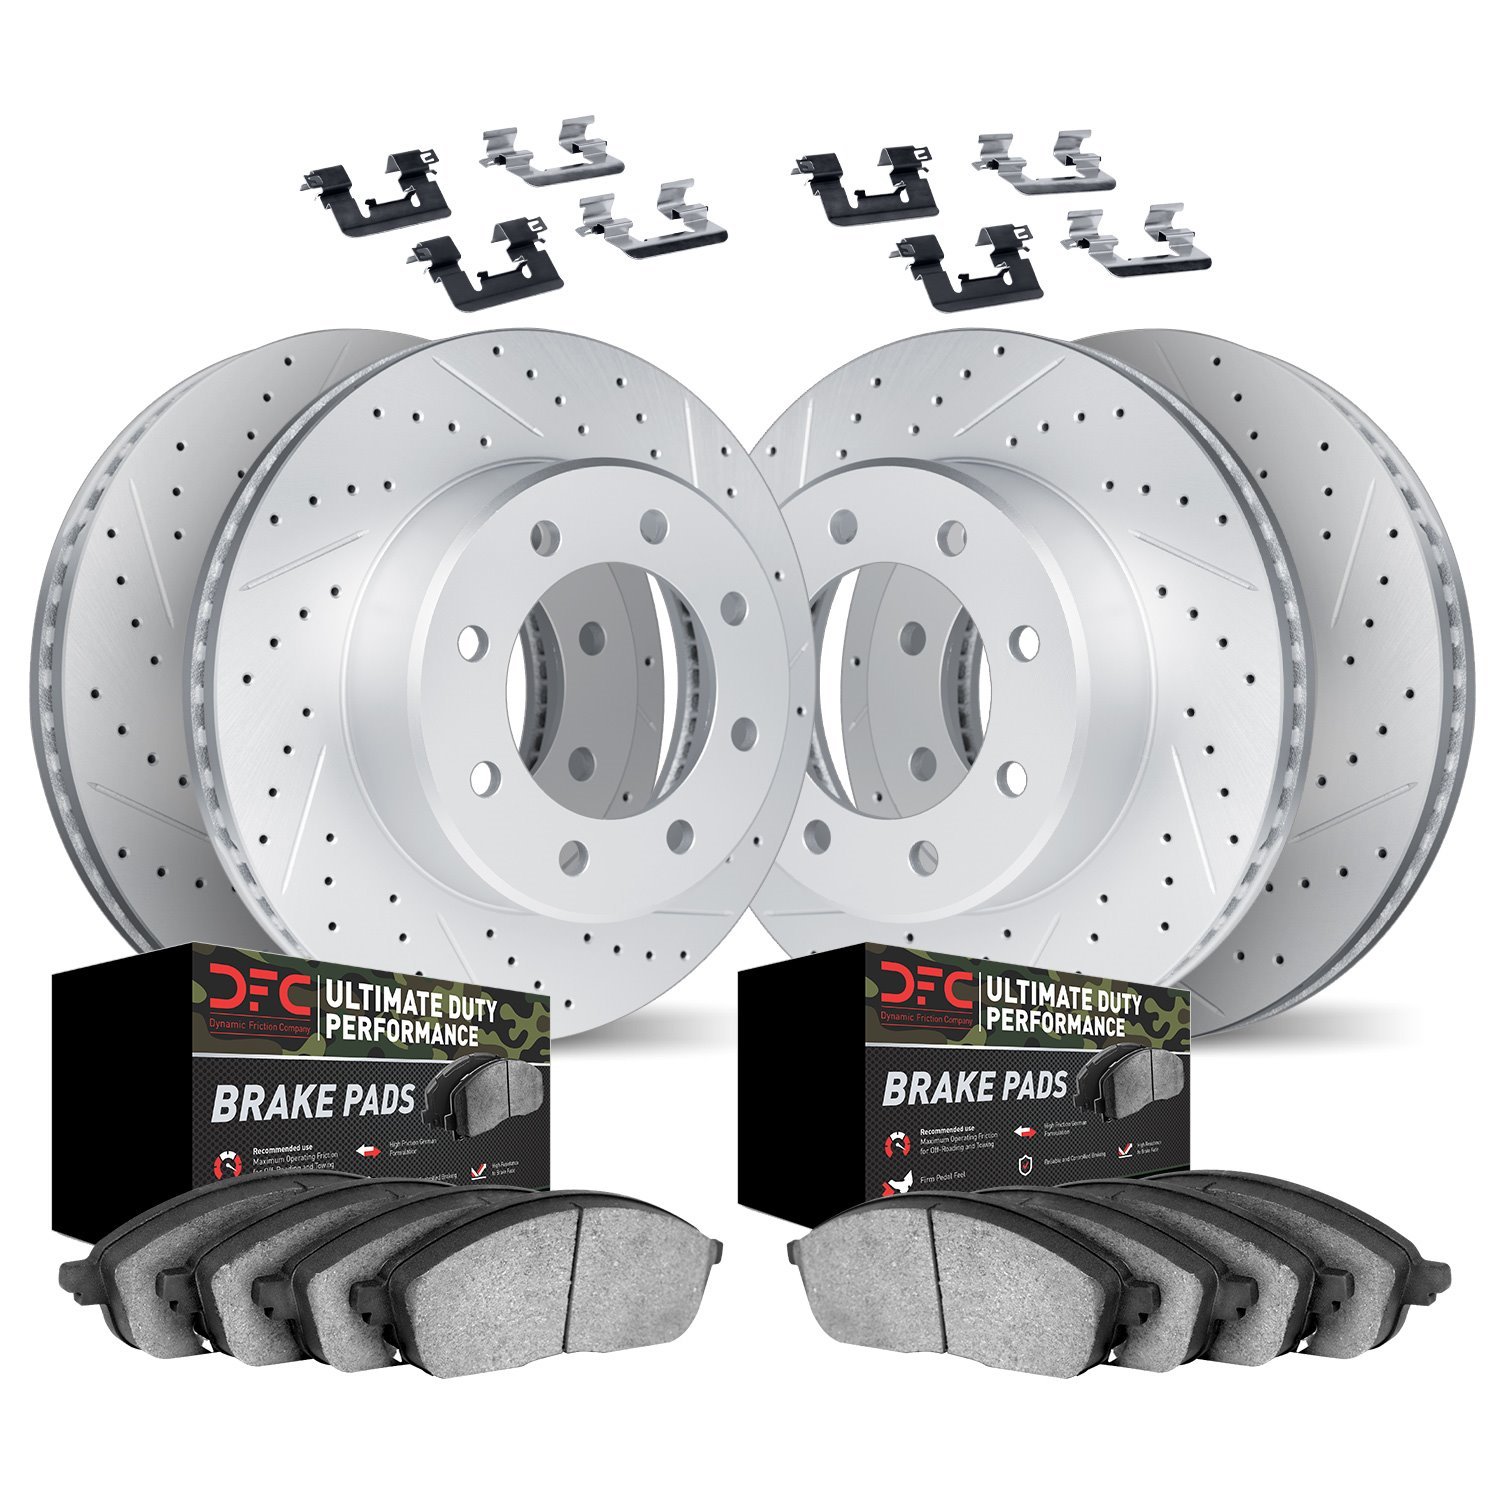 2414-54034 Geoperformance Drilled/Slotted Brake Rotors with Ultimate-Duty Brake Pads Kit & Hardware, 2010-2012 Ford/Lincoln/Merc